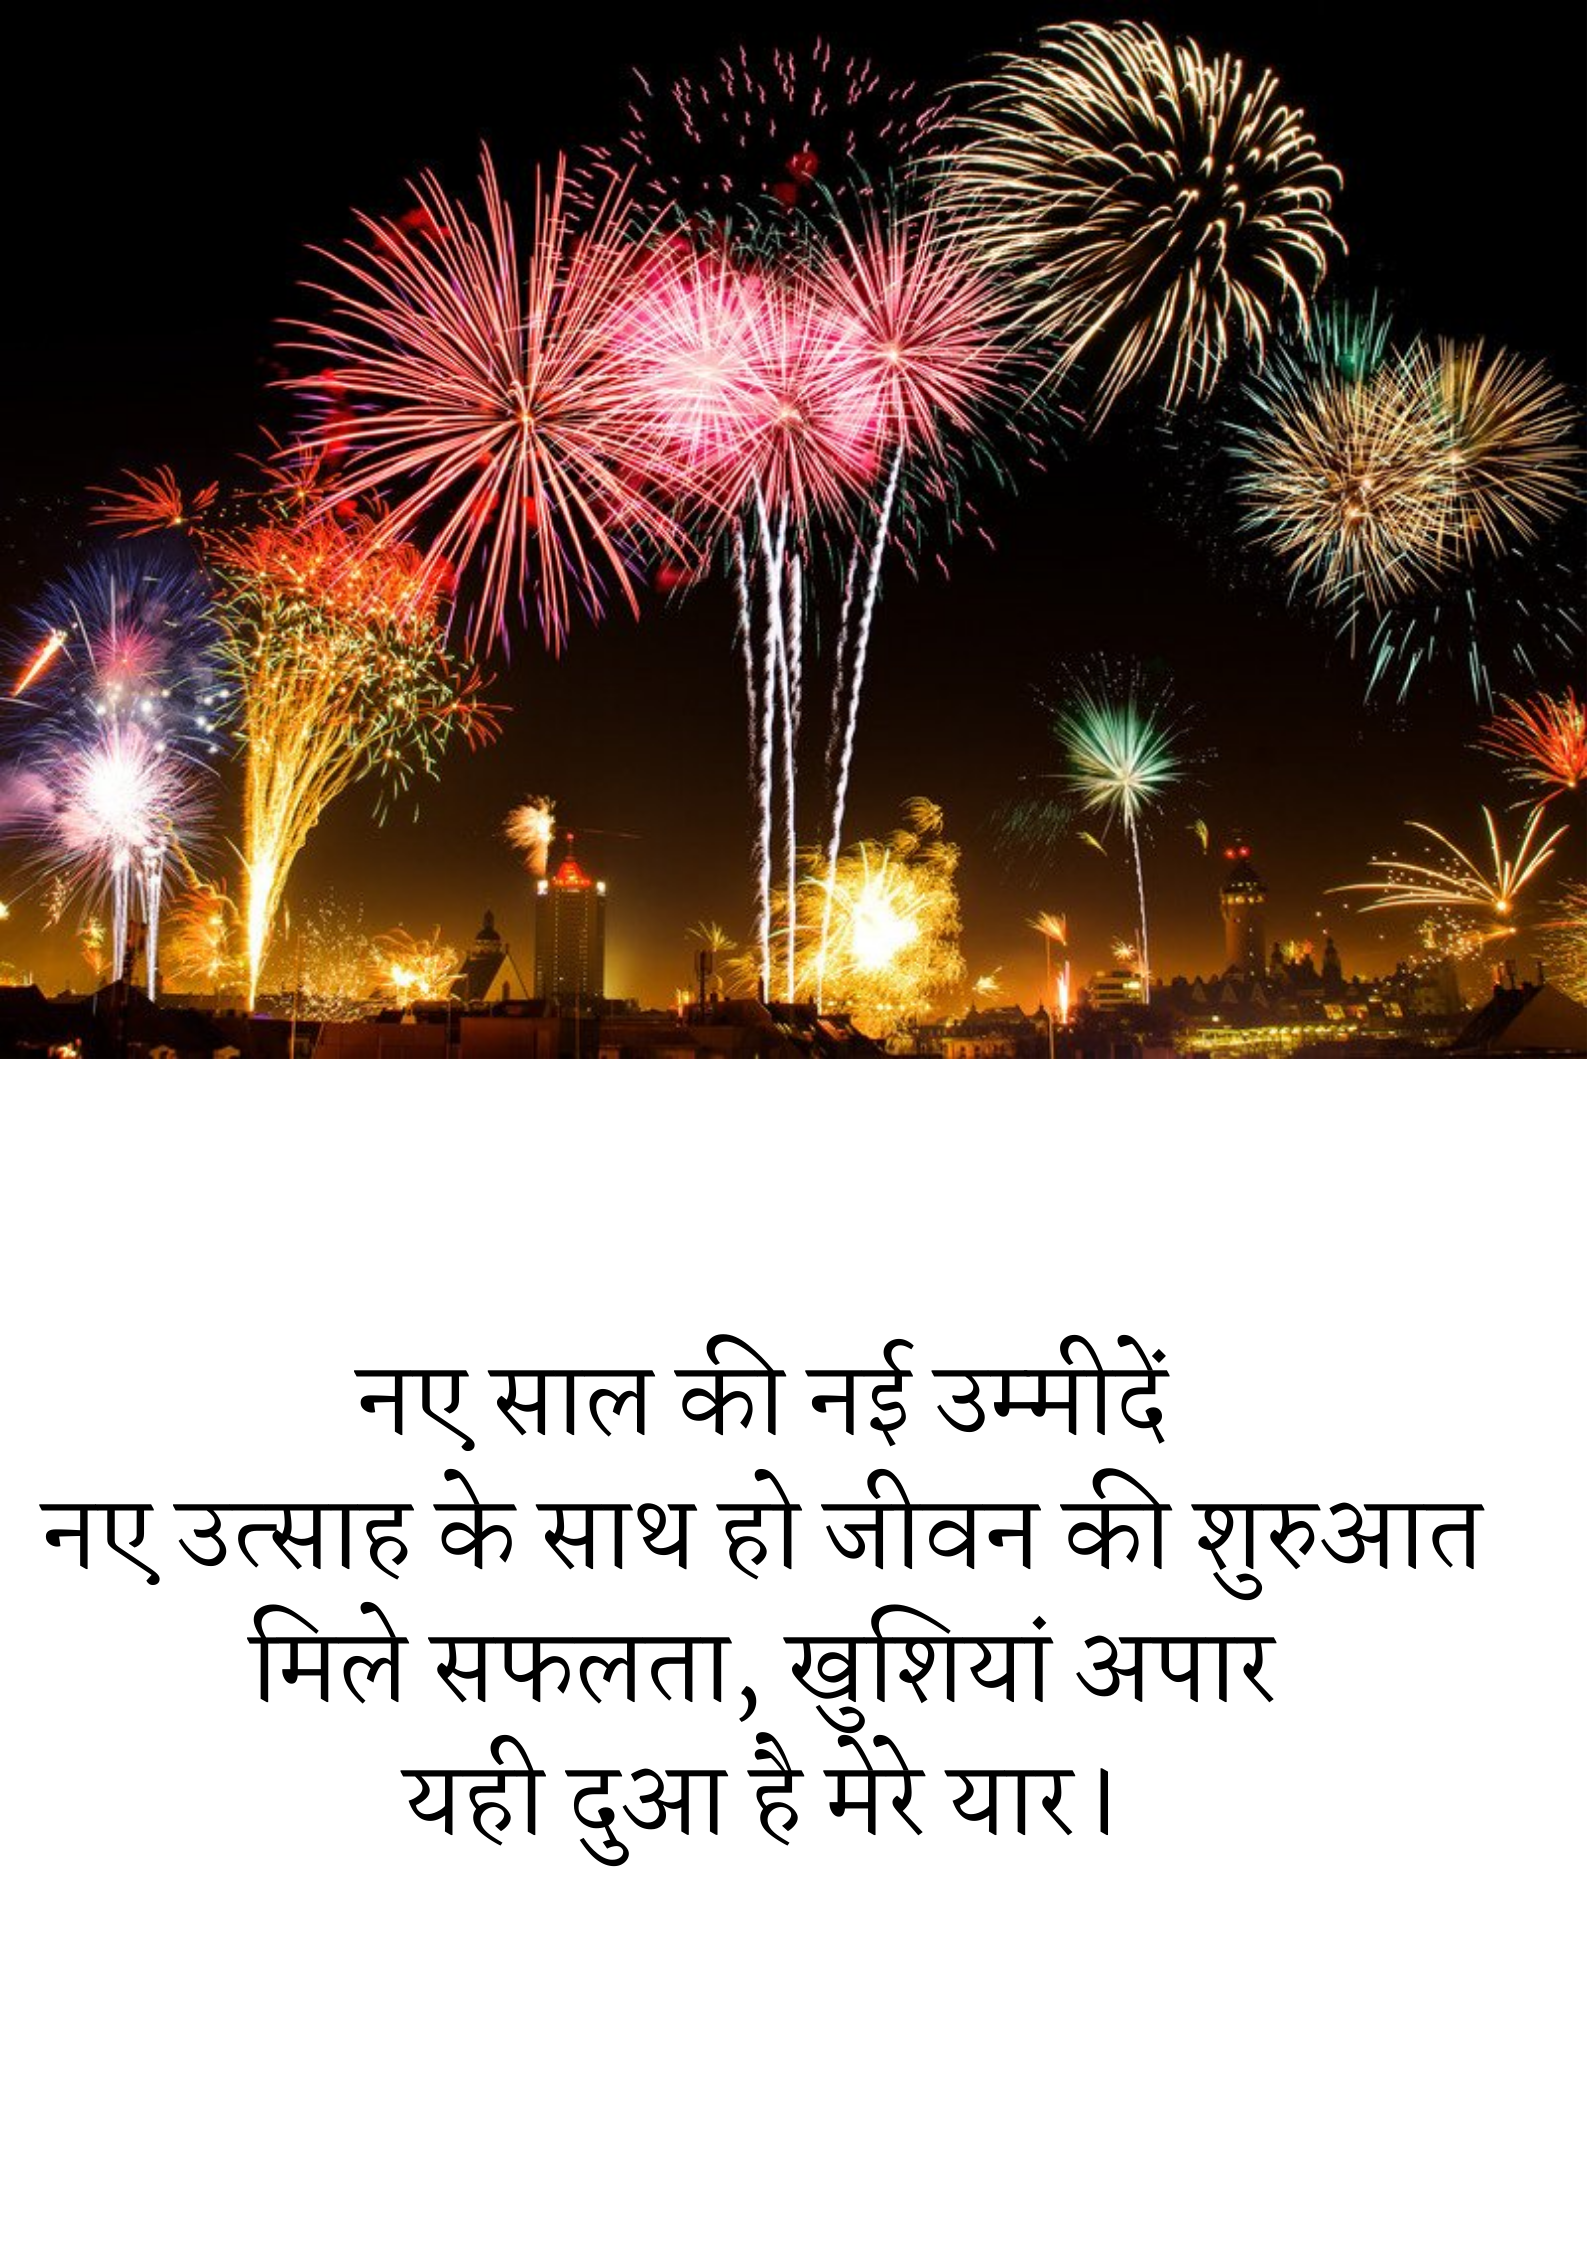 Happy New year 2022 wishes, quotes, slogan, SMS shayari, Status, Facebook Whatsapp Instagram for mother, father, brother, girlfriend, sister, family, everyone, in hindi photos & images